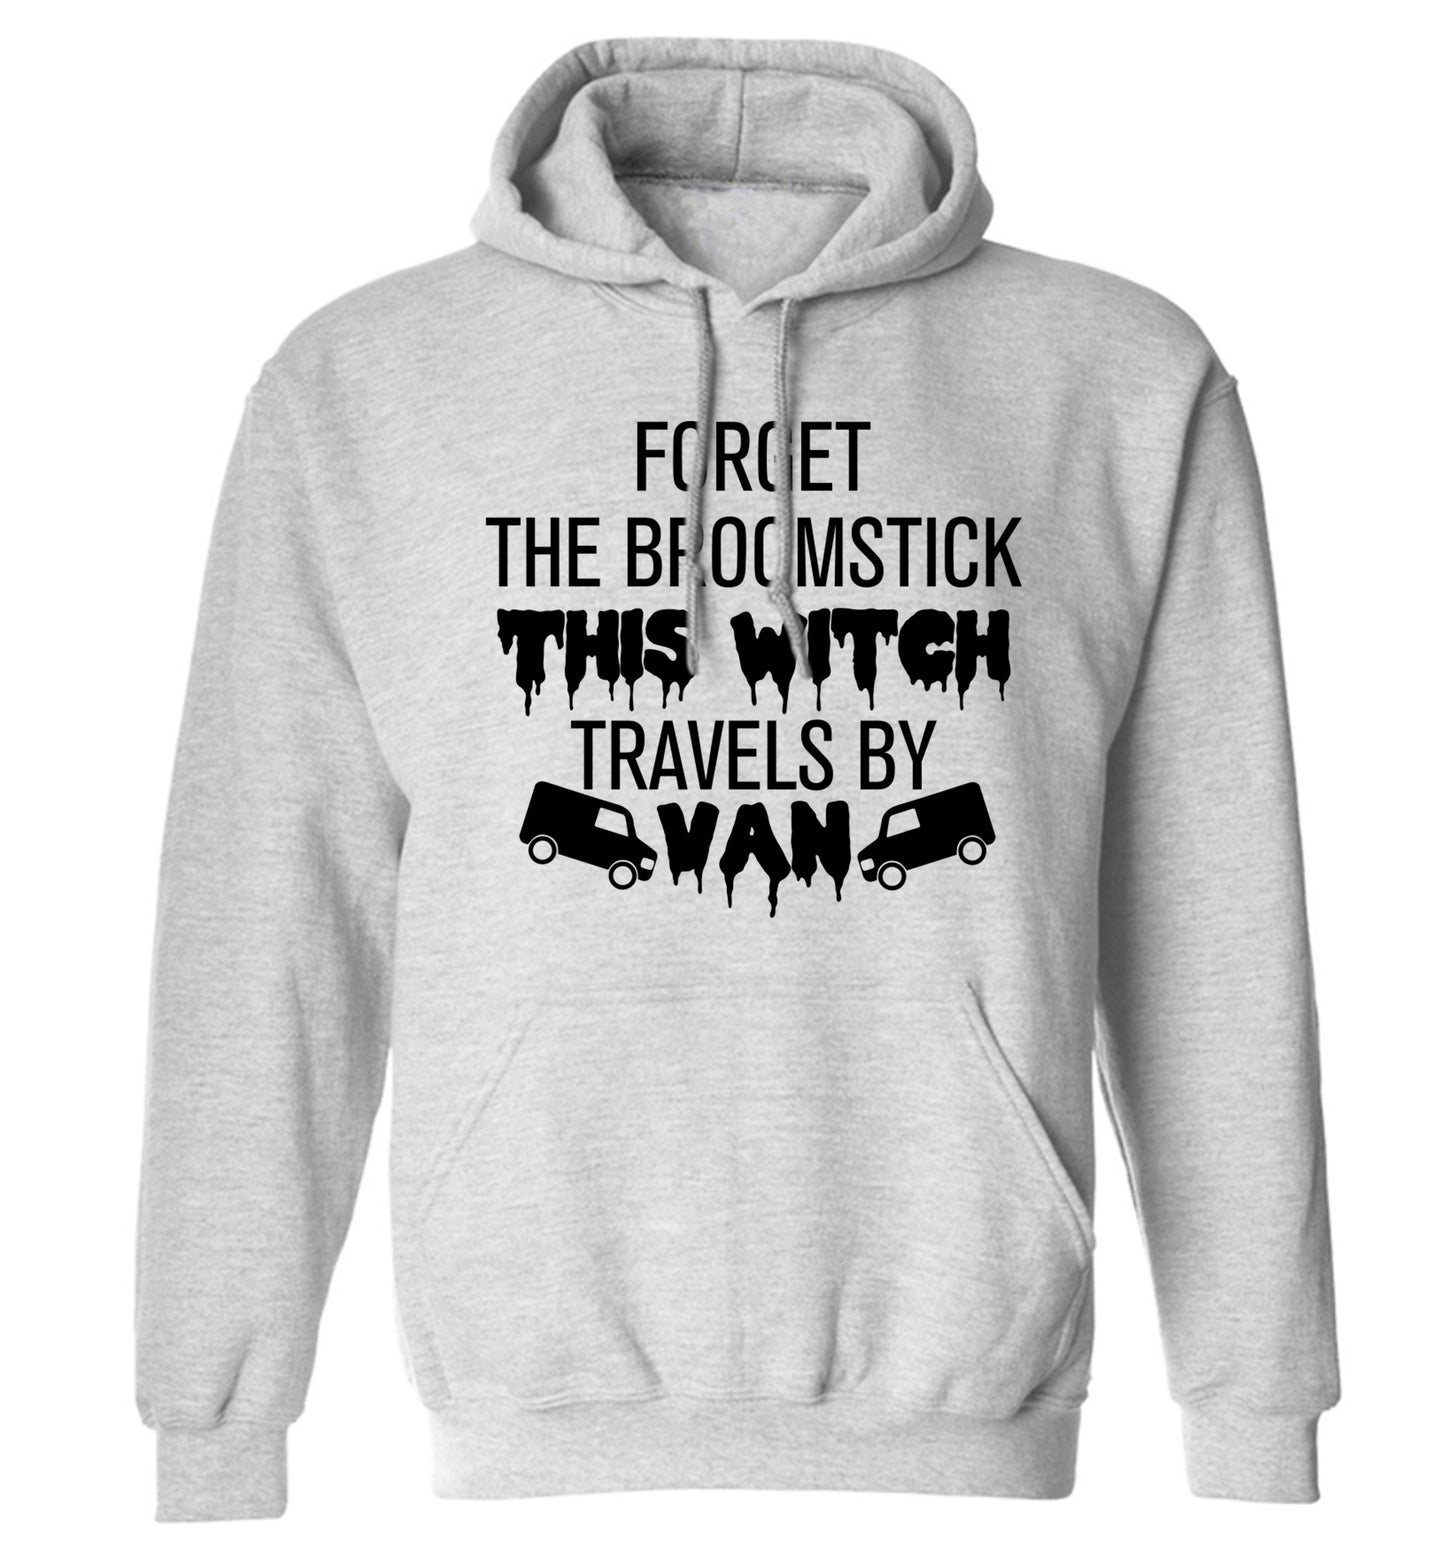 Forget the broomstick this witch travels by van adults unisexgrey hoodie 2XL